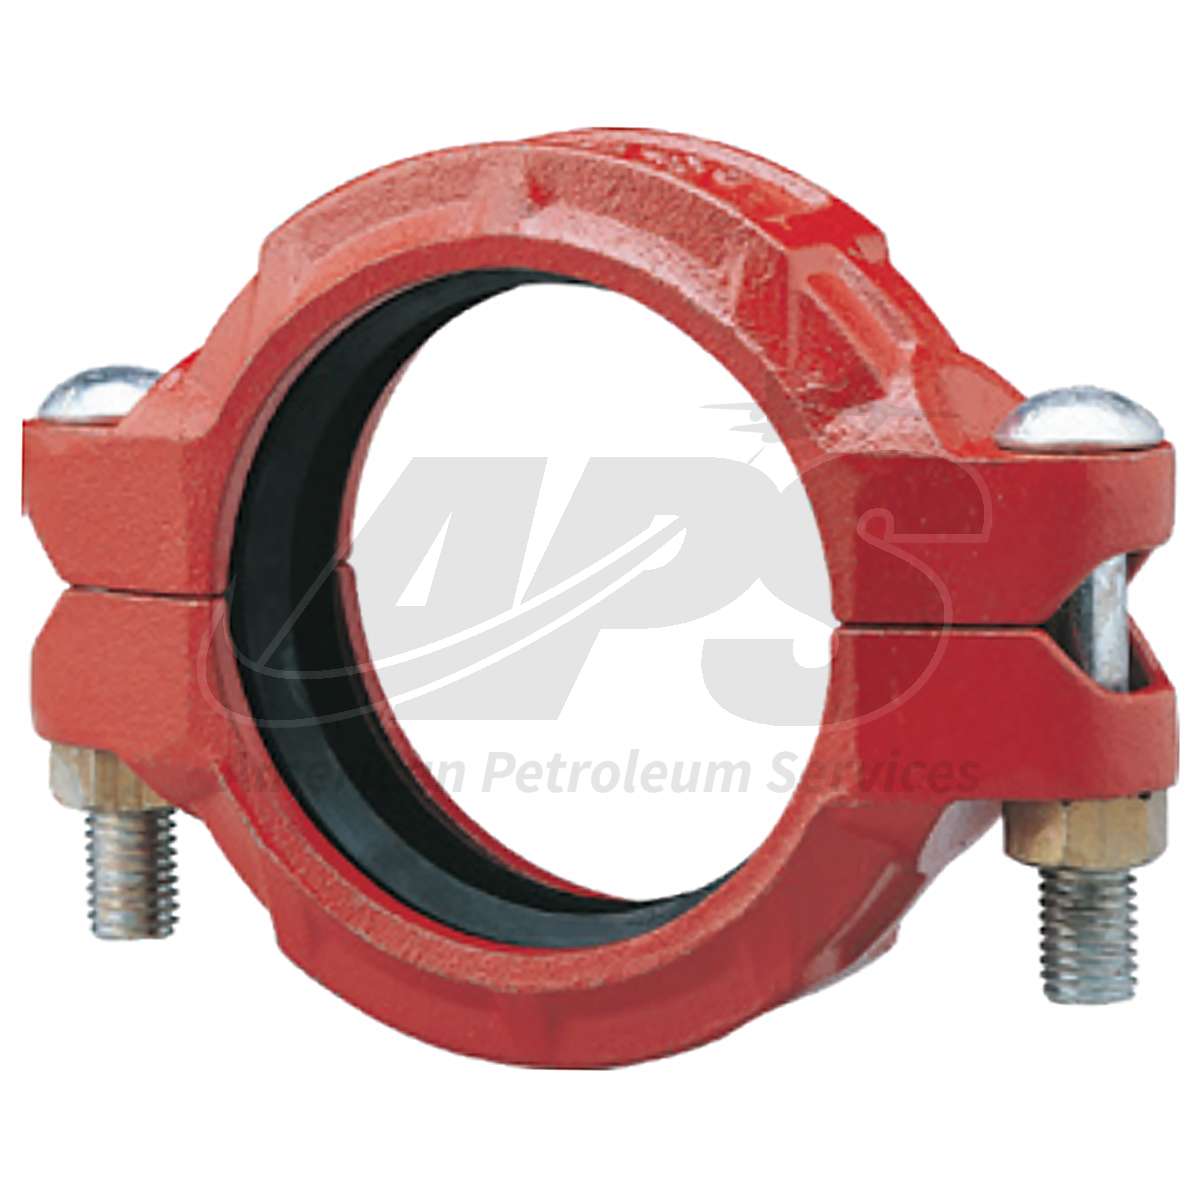 Victaulic Style 75 3-1/2 in Grooved Painted Ductile Iron Coupling with E Gasket 